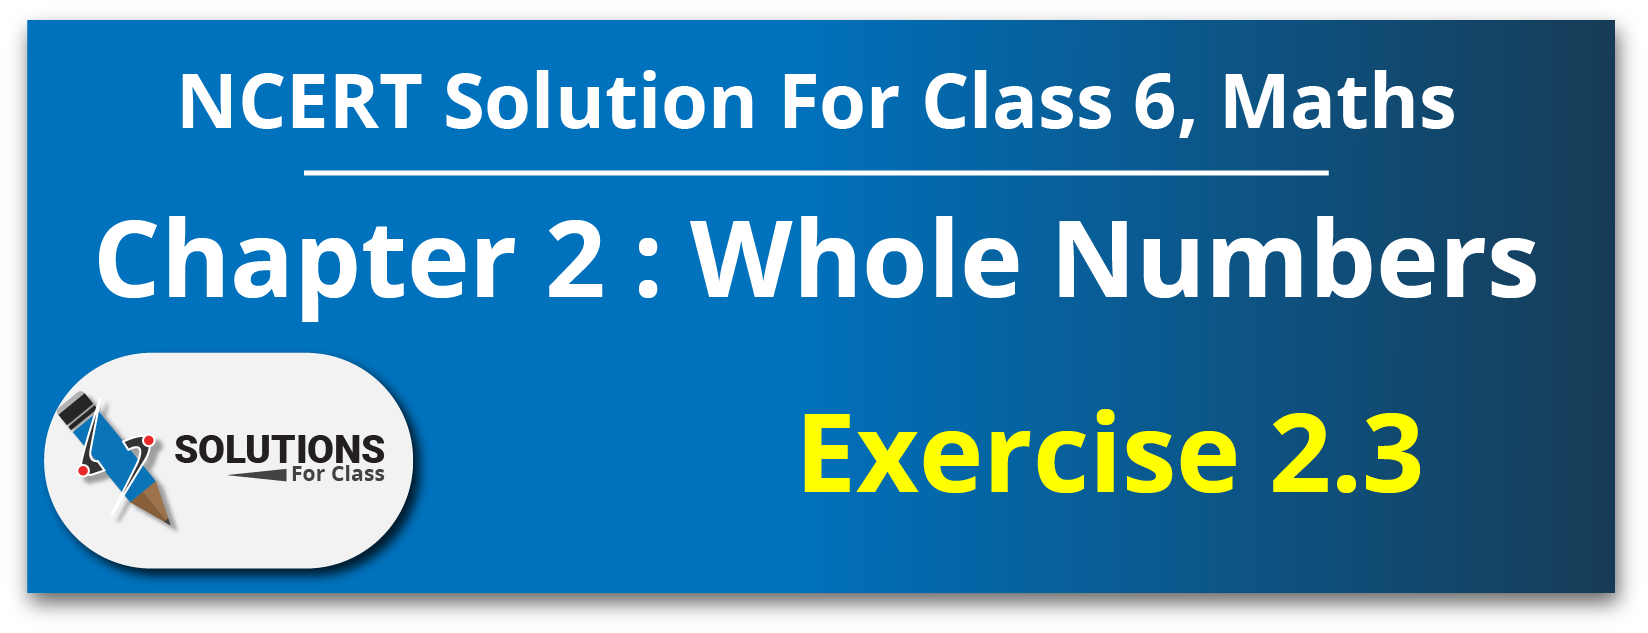 NCERT Solutions for Class 6 Maths, chapter 2, Whole Numbers, Exercise 2.3,class 6th maths 2.3,whole number exercise 2.3